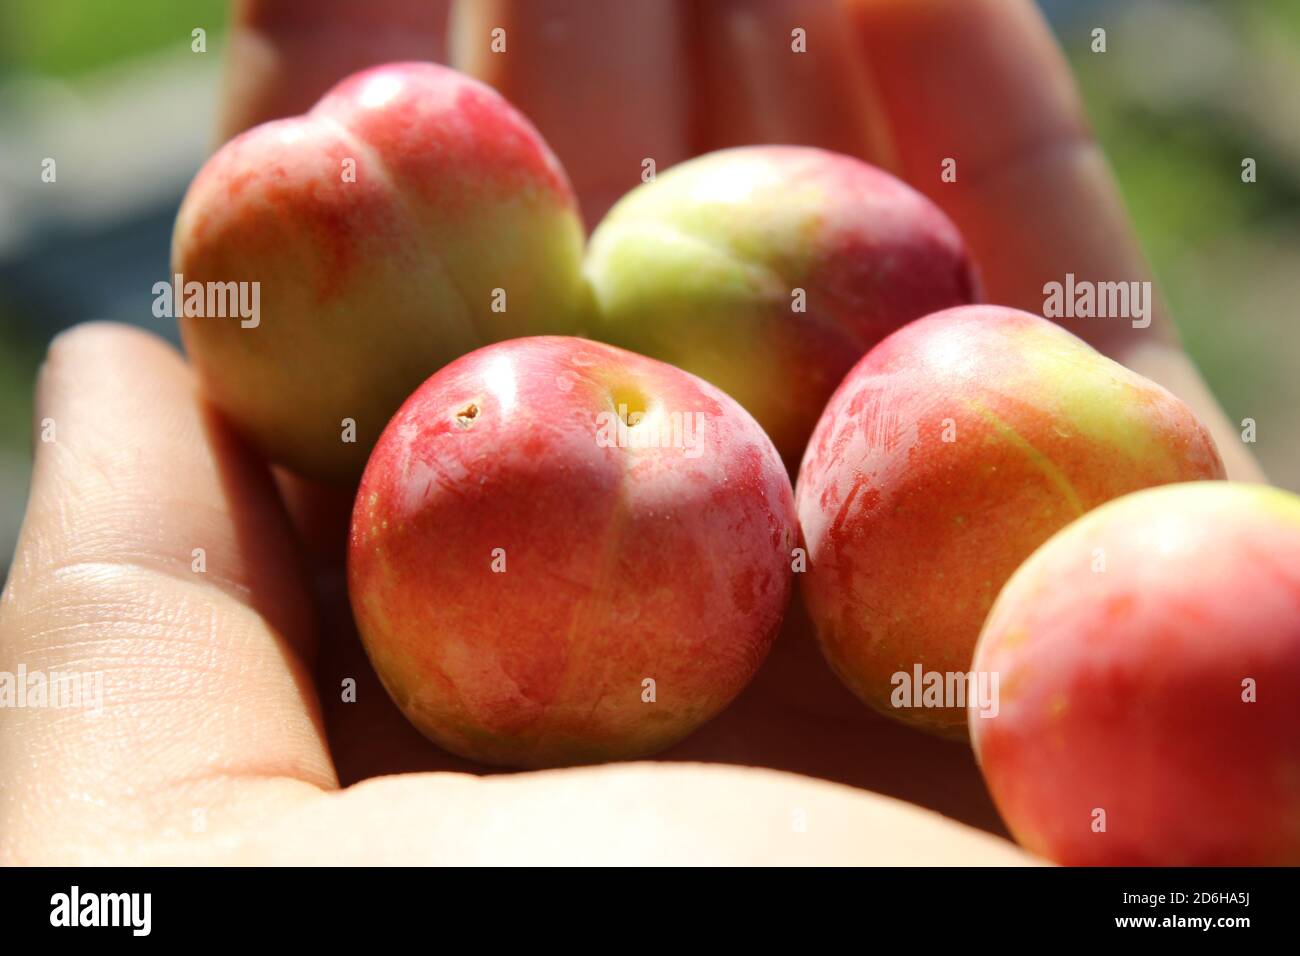 Cherry plum with colourful color on the hand Stock Photo